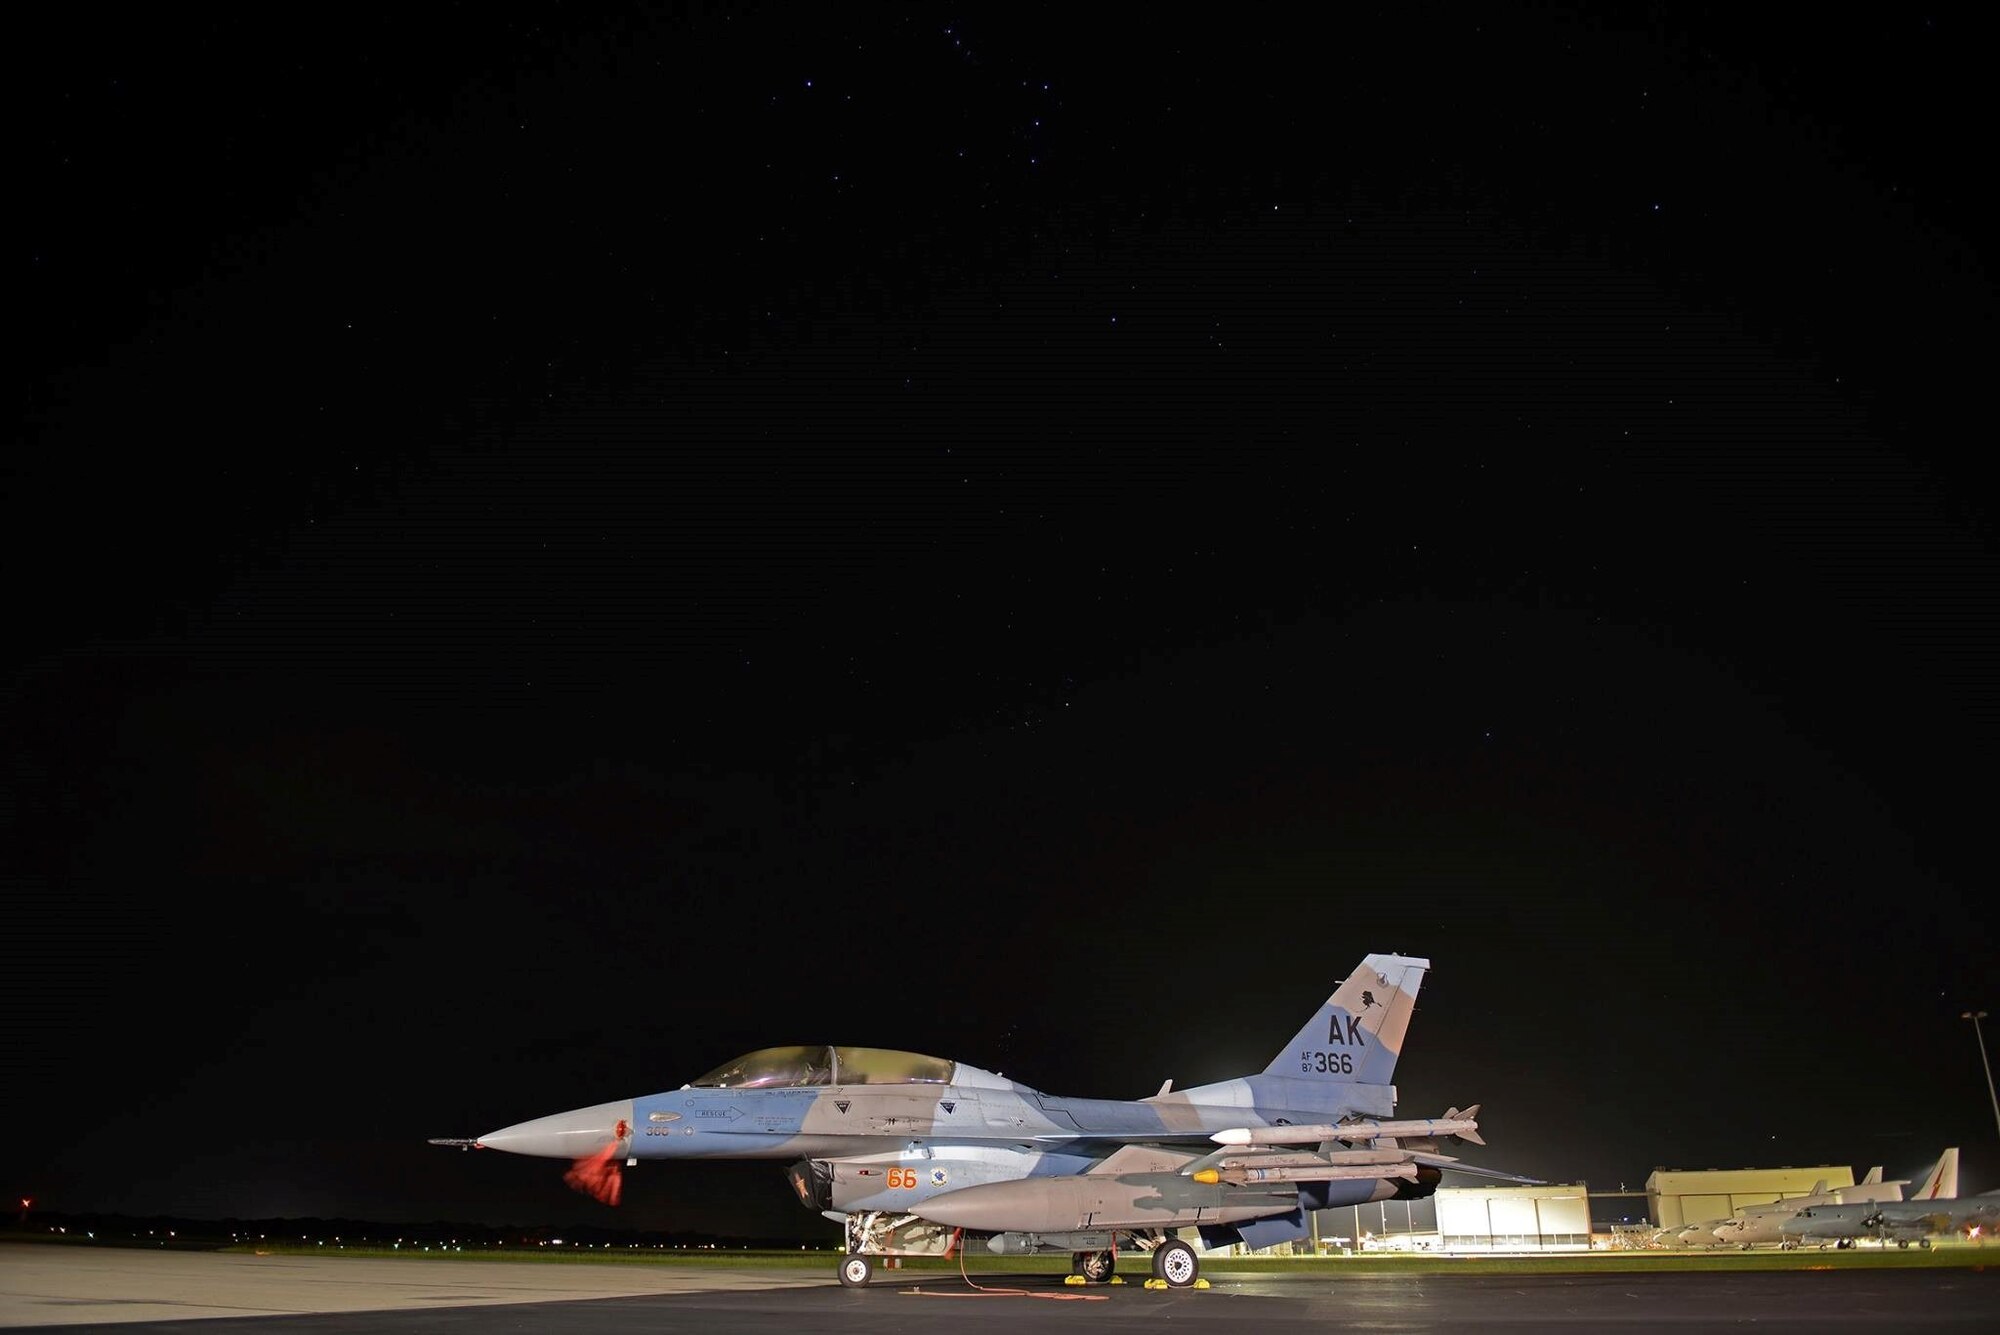 A U.S. Air Force F-16 Fighting Falcon sits under the night sky at Royal Australian Air Force Base Williamtown, in New South Wales, Australia, March 19, 2017. As a benchmark for aerial combat training through its annual series of Red Flag-Alaska exercises, integration of Eielson’s 18th Aggressor pilot’s enhances interoperability and ensures the RAAF can operate in a combined environment to respond to any contingency in the region and provide an agile, decisive and effective deterrent to any future challenges. (U.S. Air Force photo by Tech. Sgt. Steven R. Doty) 